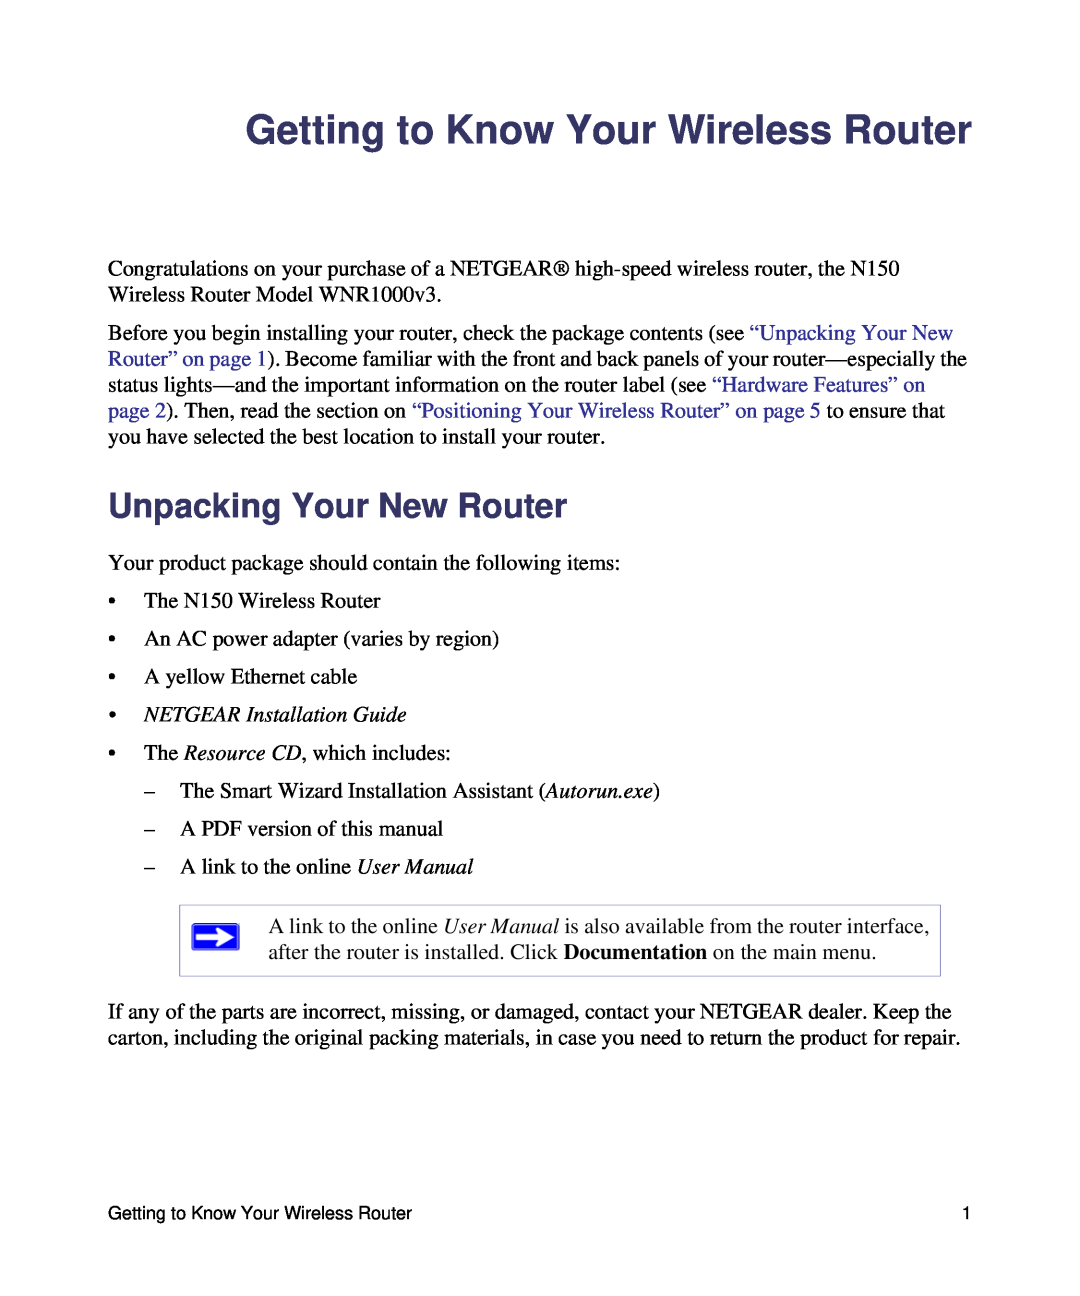 NETGEAR N150, WNR1000 manual Getting to Know Your Wireless Router, Unpacking Your New Router, NETGEAR Installation Guide 